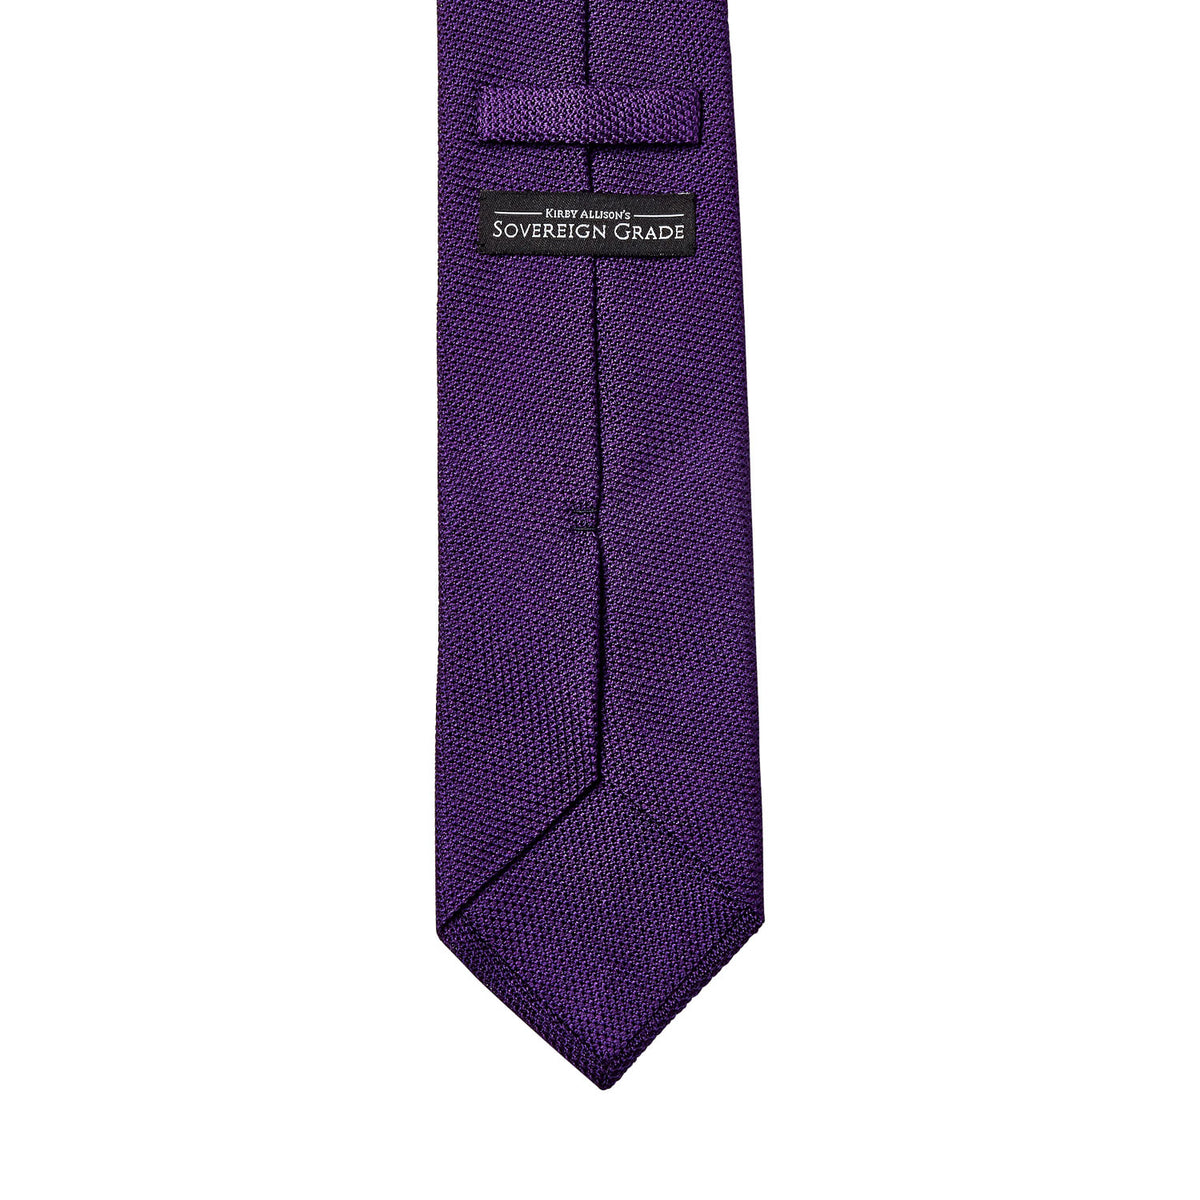 A Sovereign Grade Grenadine Fina Purple Tie of highest quality on a white background, handmade in the United Kingdom by KirbyAllison.com.